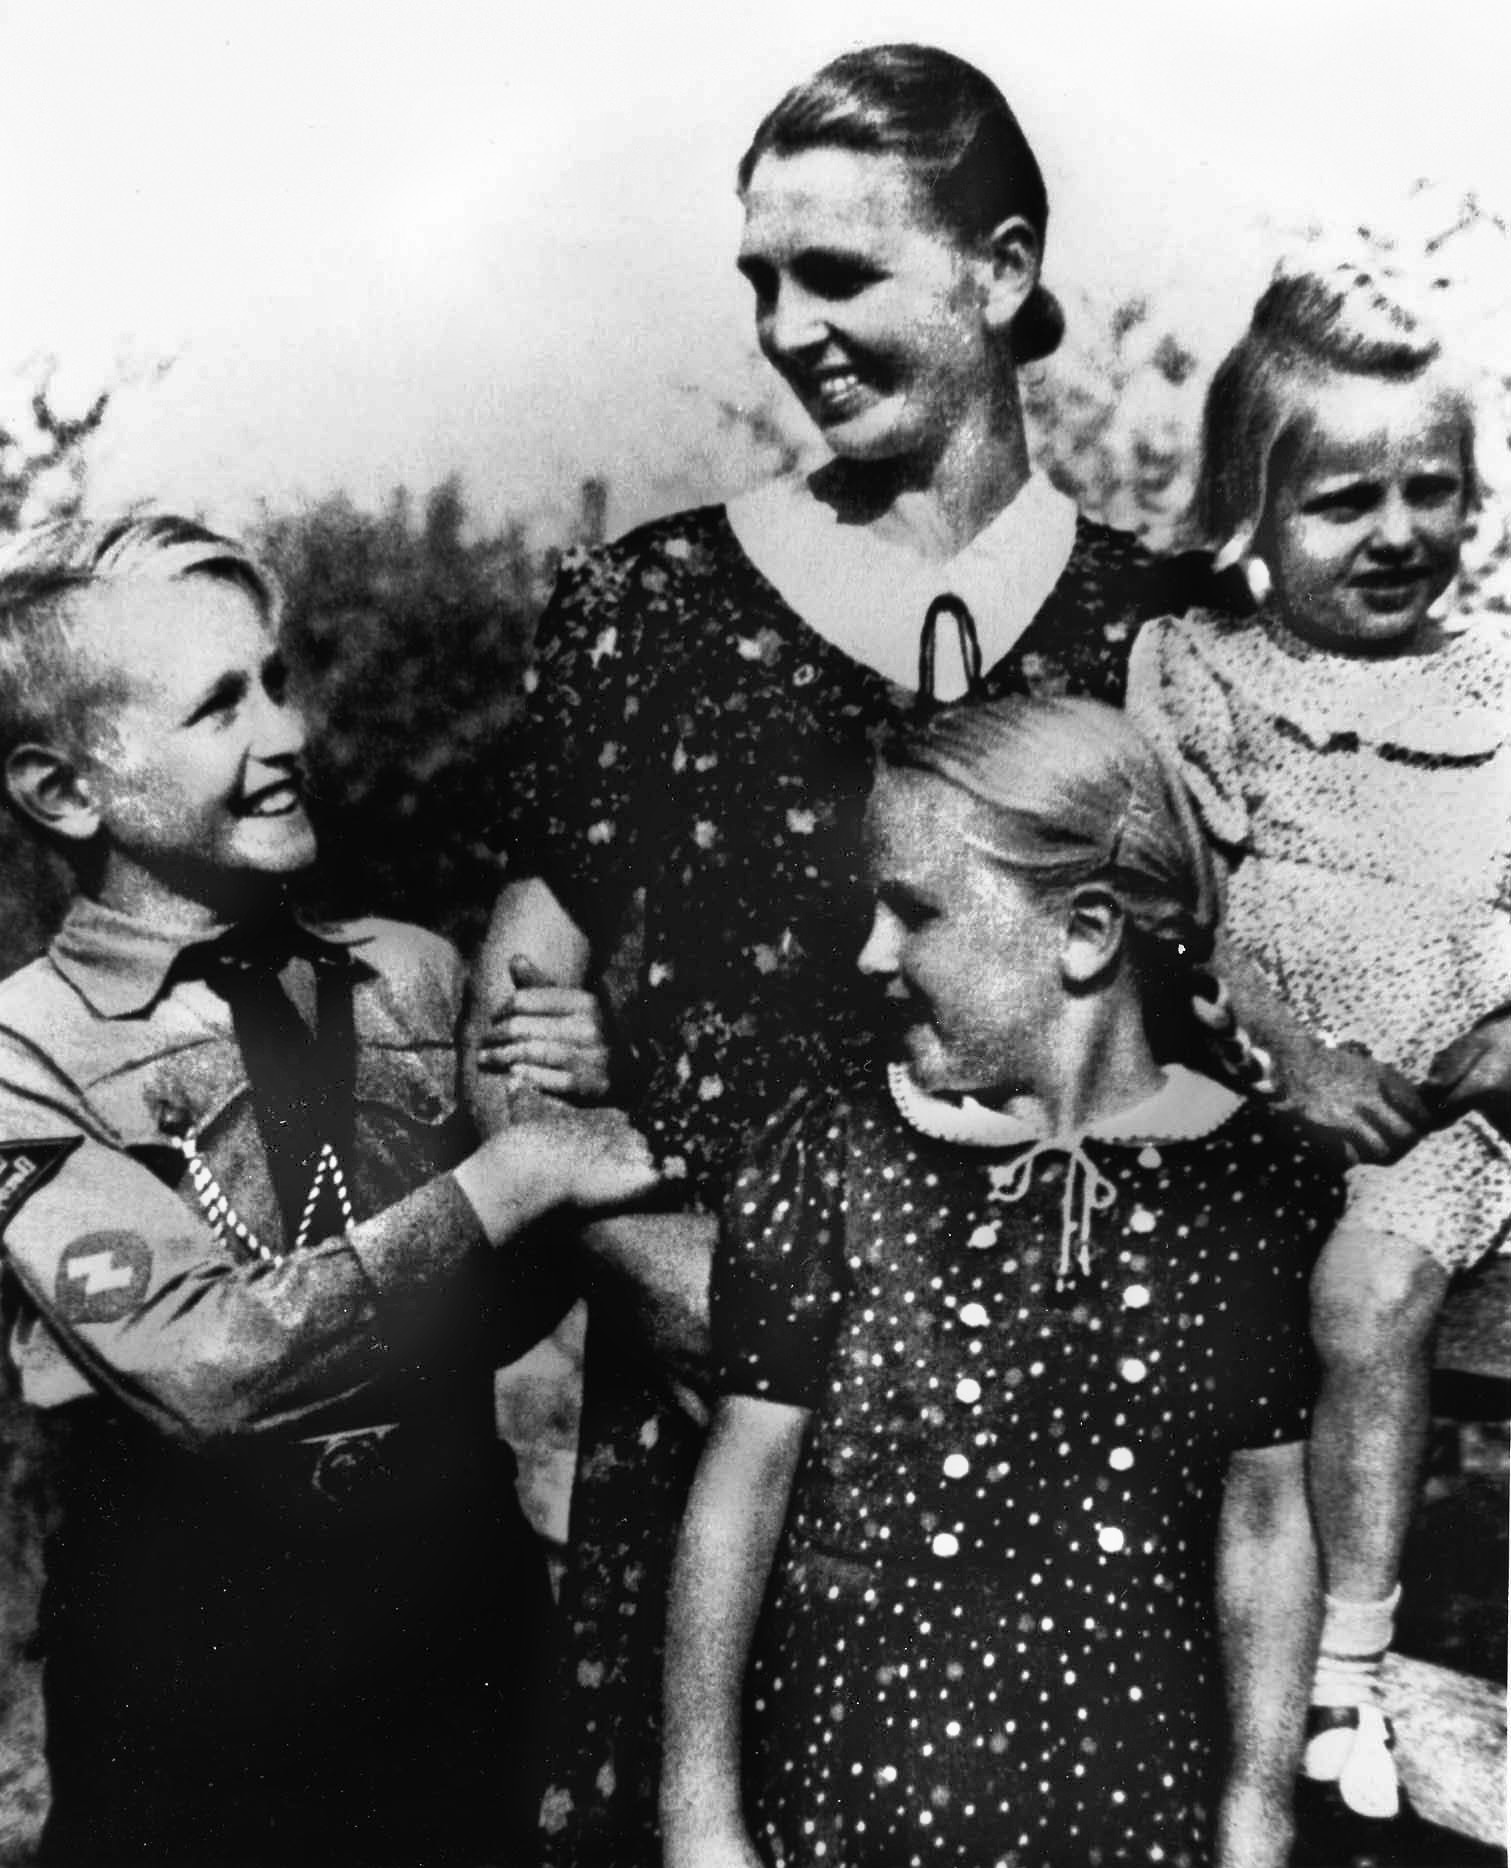 A German mother and her three children seem to be striking a pose as the ideal Nazi nuclear family, perhaps a product of the Lebensborn Program.